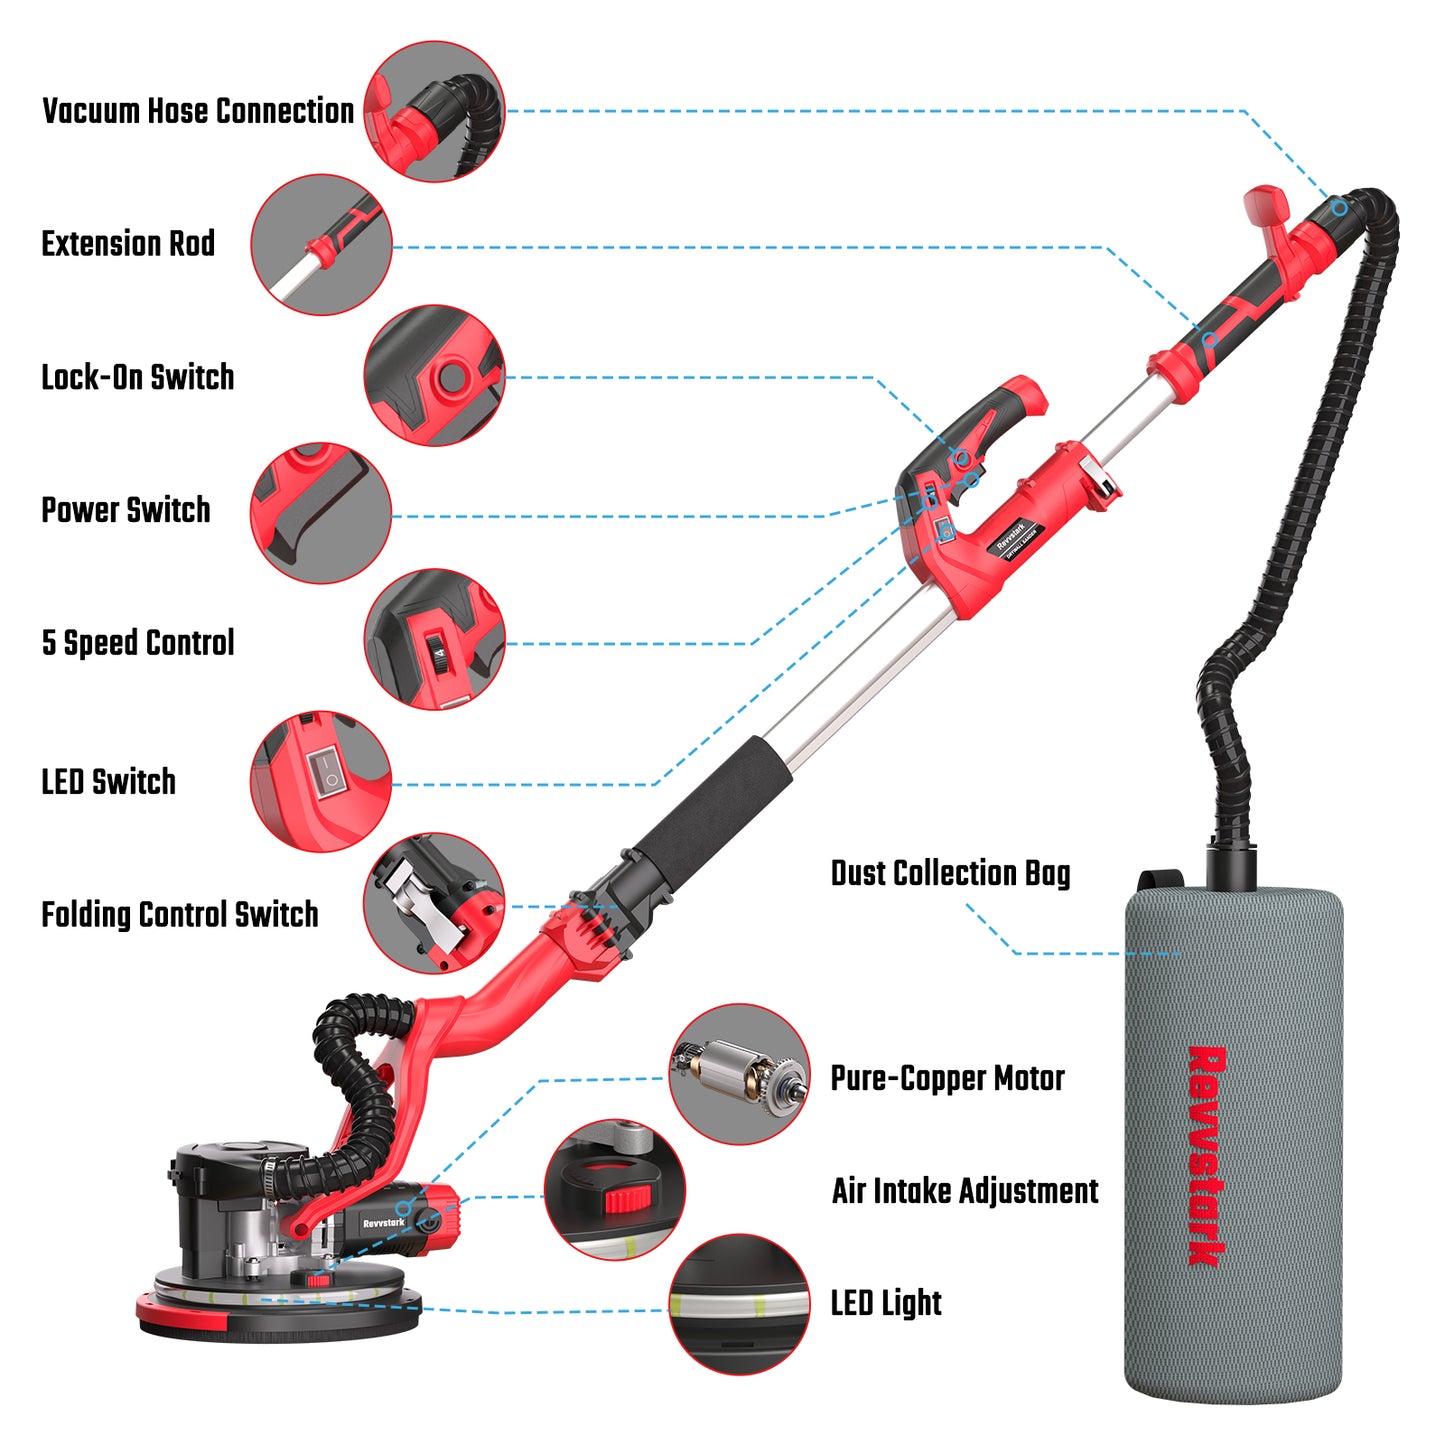 Drywall Sander, Electric Drywall Sander with Vacuum Dust Collection 7.33-Amp 880W, Floor Sanders 5 Variable Speed 500-1800RPM with LED Light, 10 Pcs Sanding Discs & 2 Pcs Grid Sandpaper